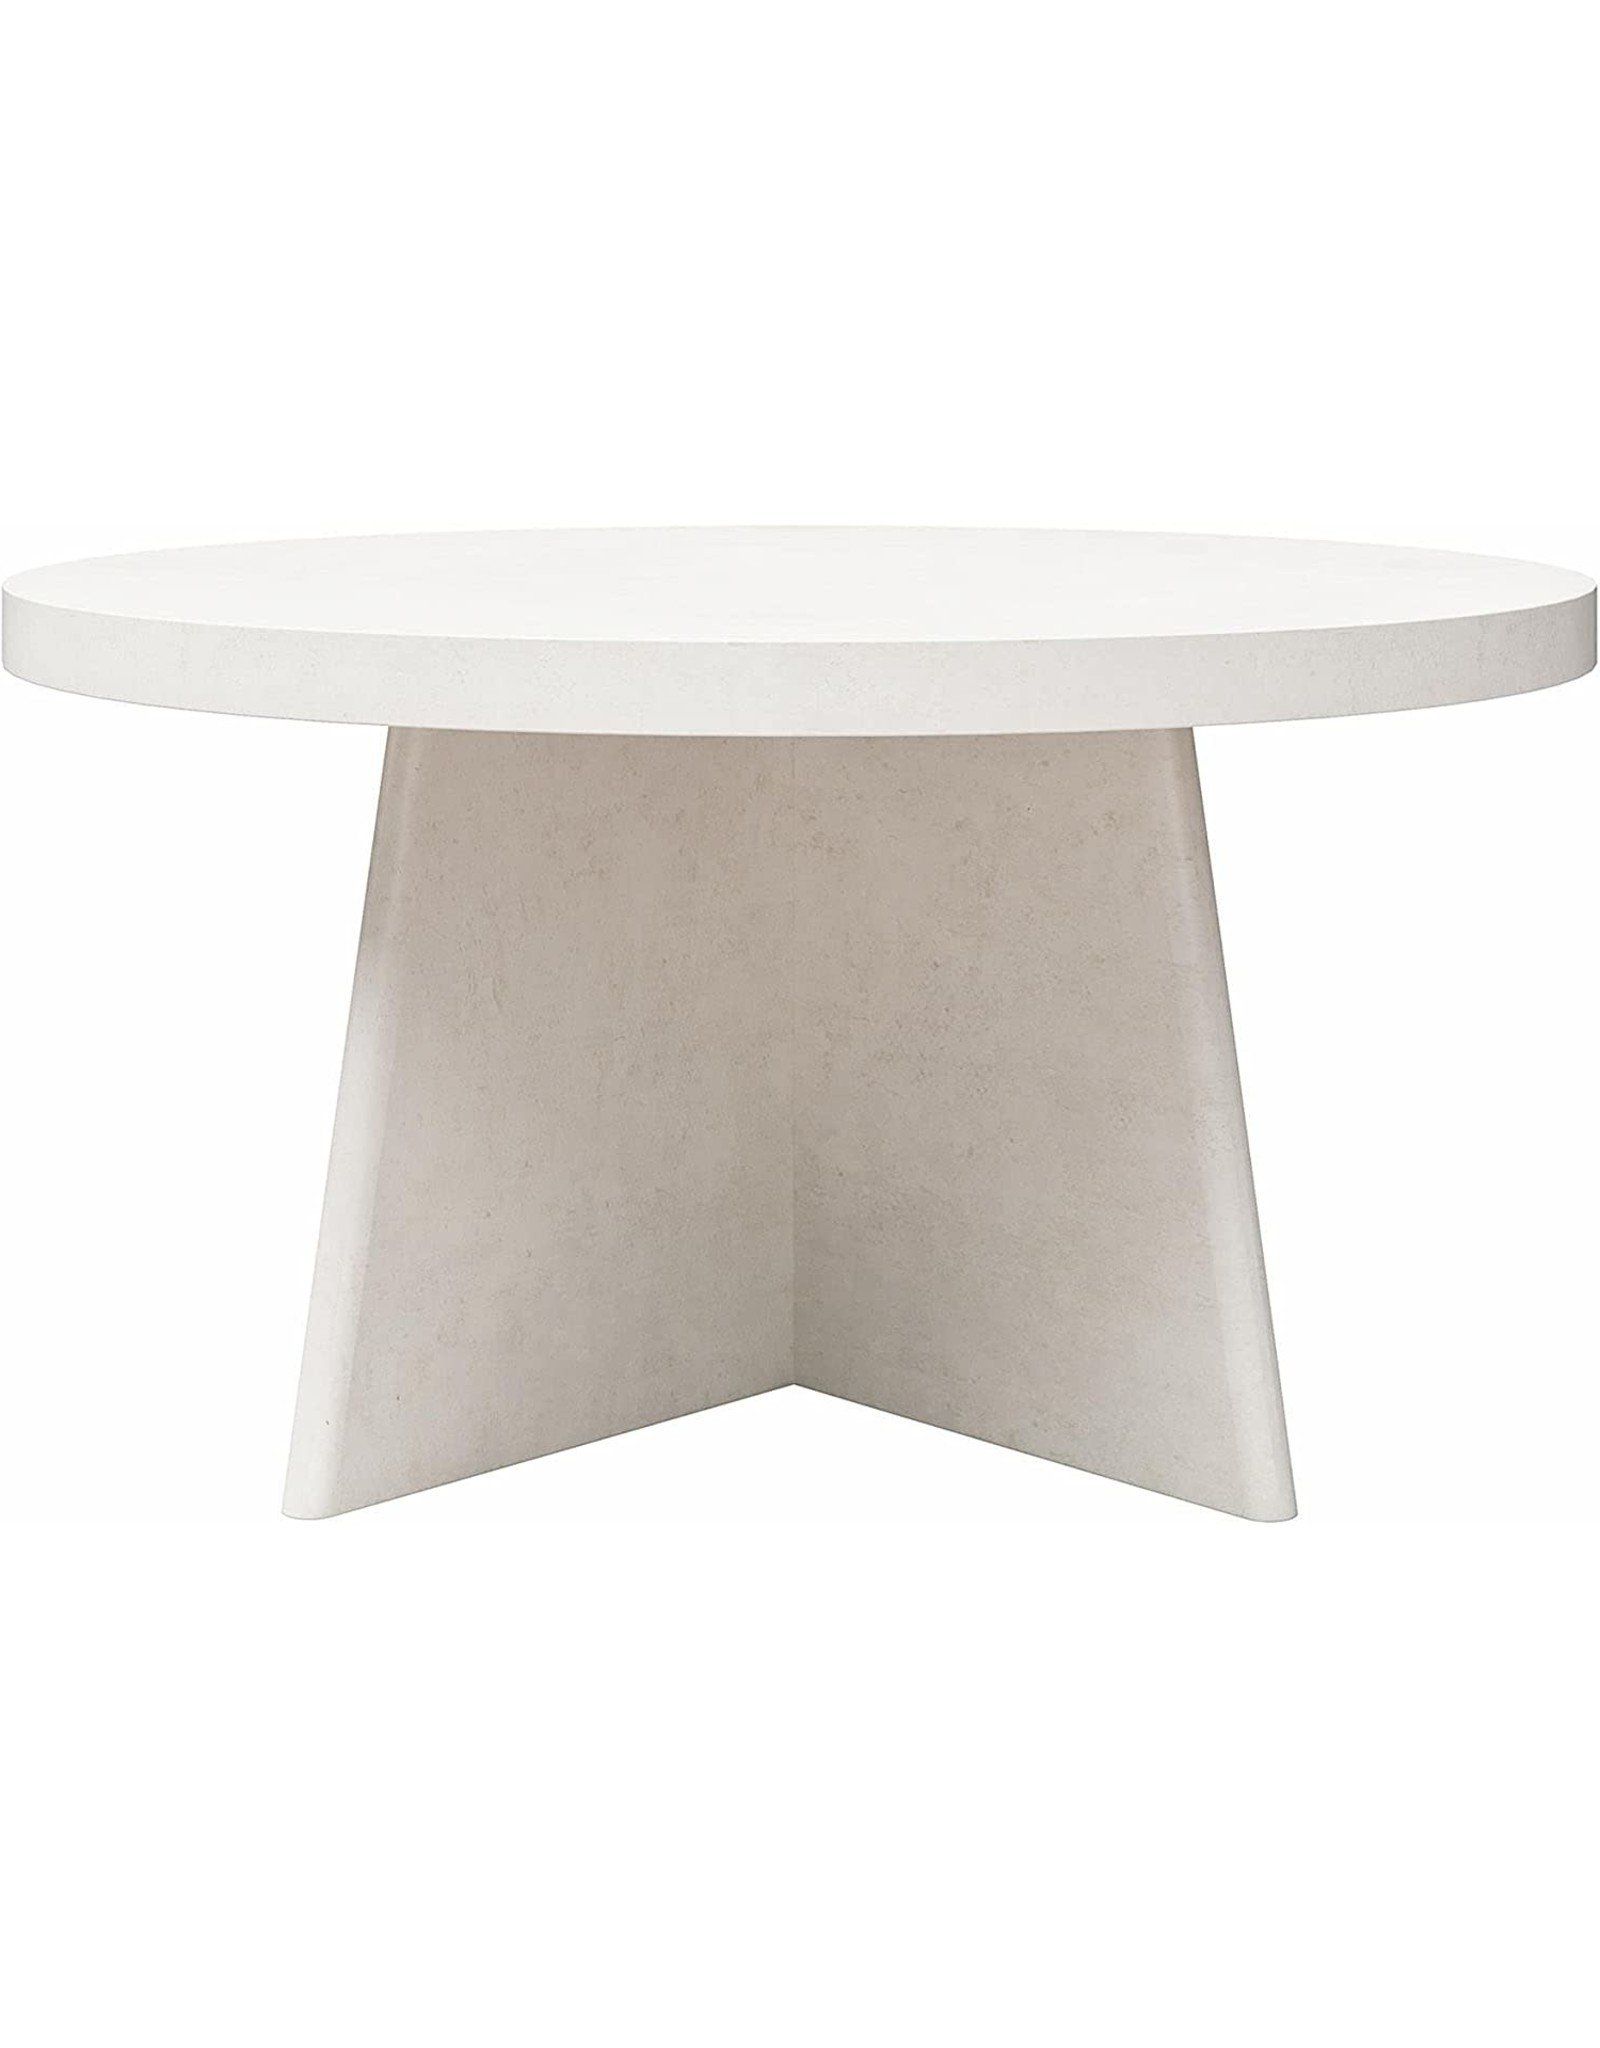 Liam Round Plaster Coffee Tables Regarding Most Recent Ksoijor Liam Round Coffee Table, Plaster – Amazing Bargains Usa (View 2 of 15)